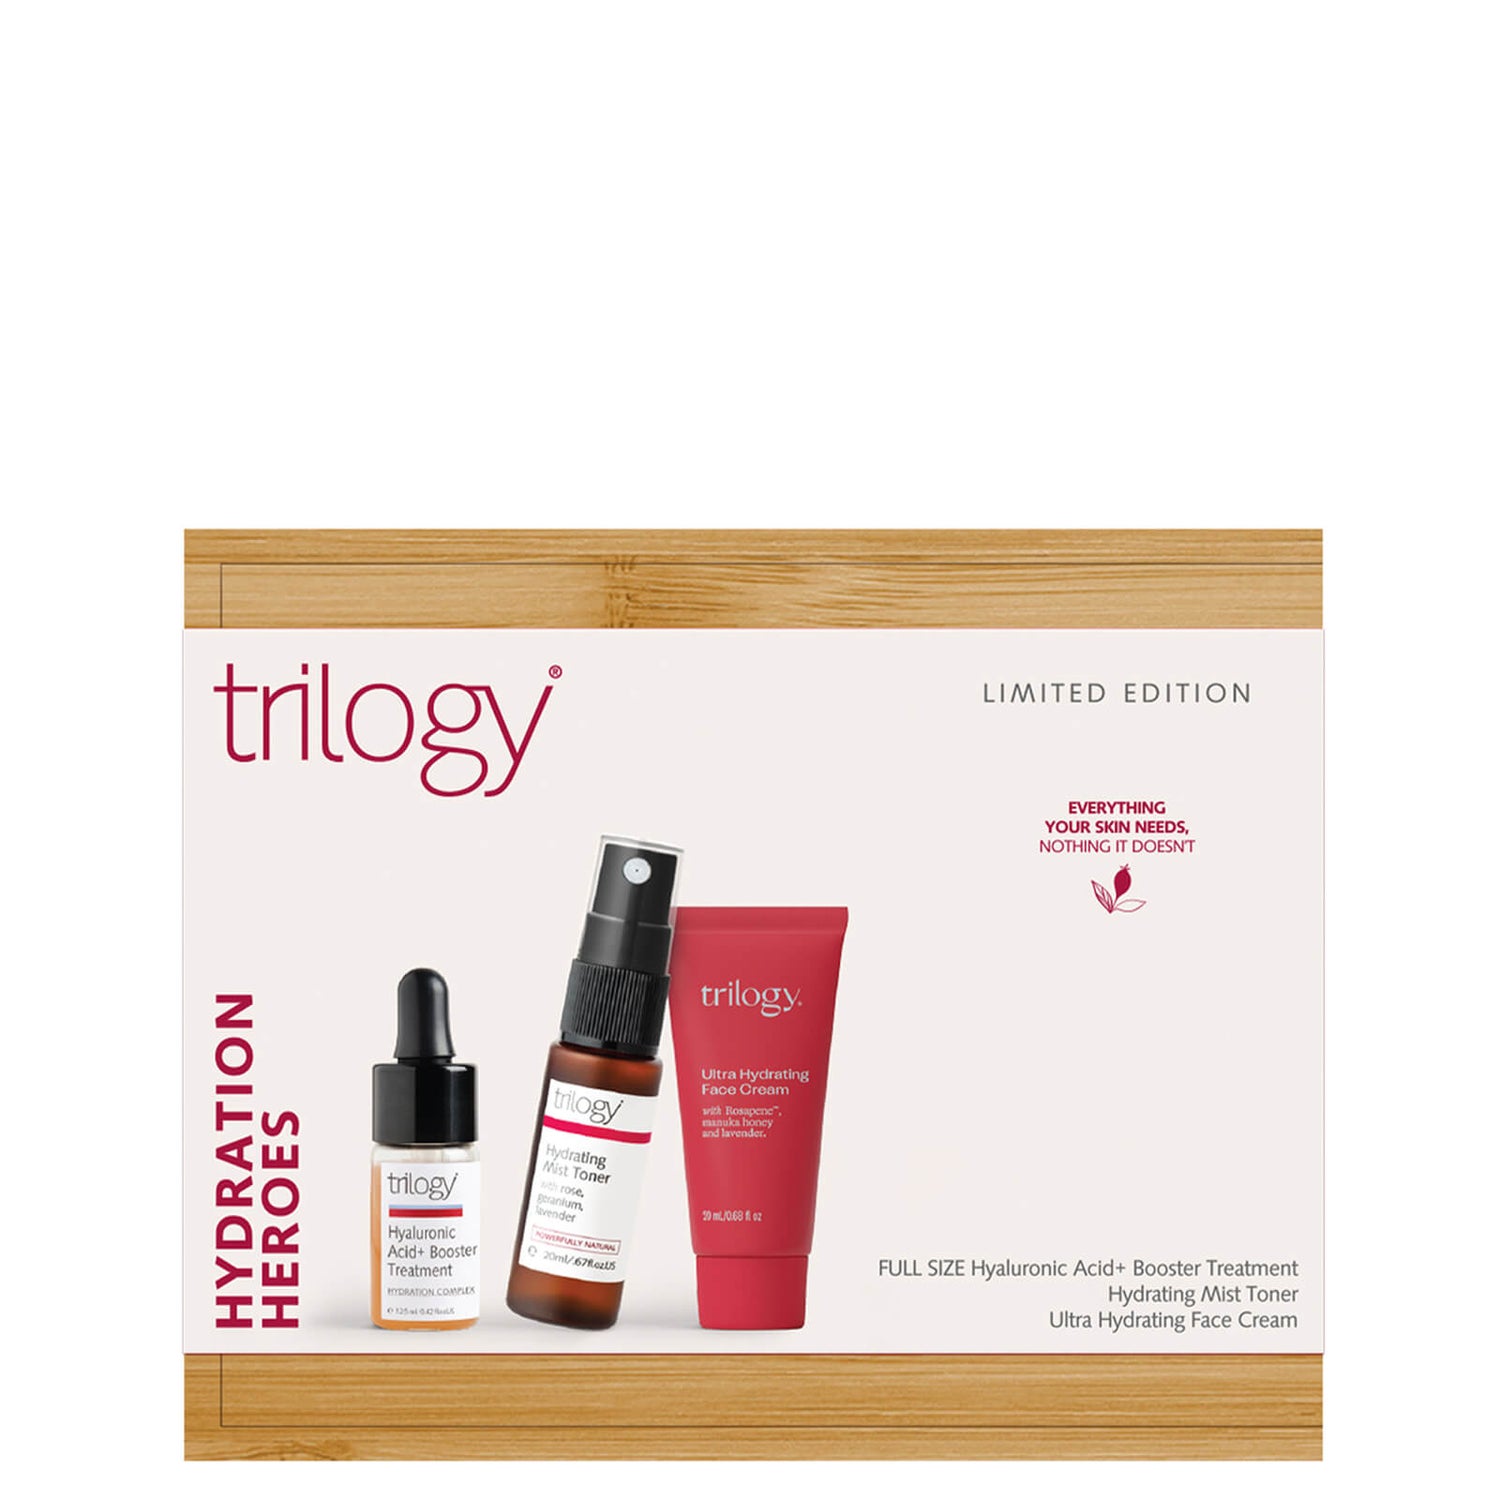 Trilogy Hydration Heroes (Worth £40.00)